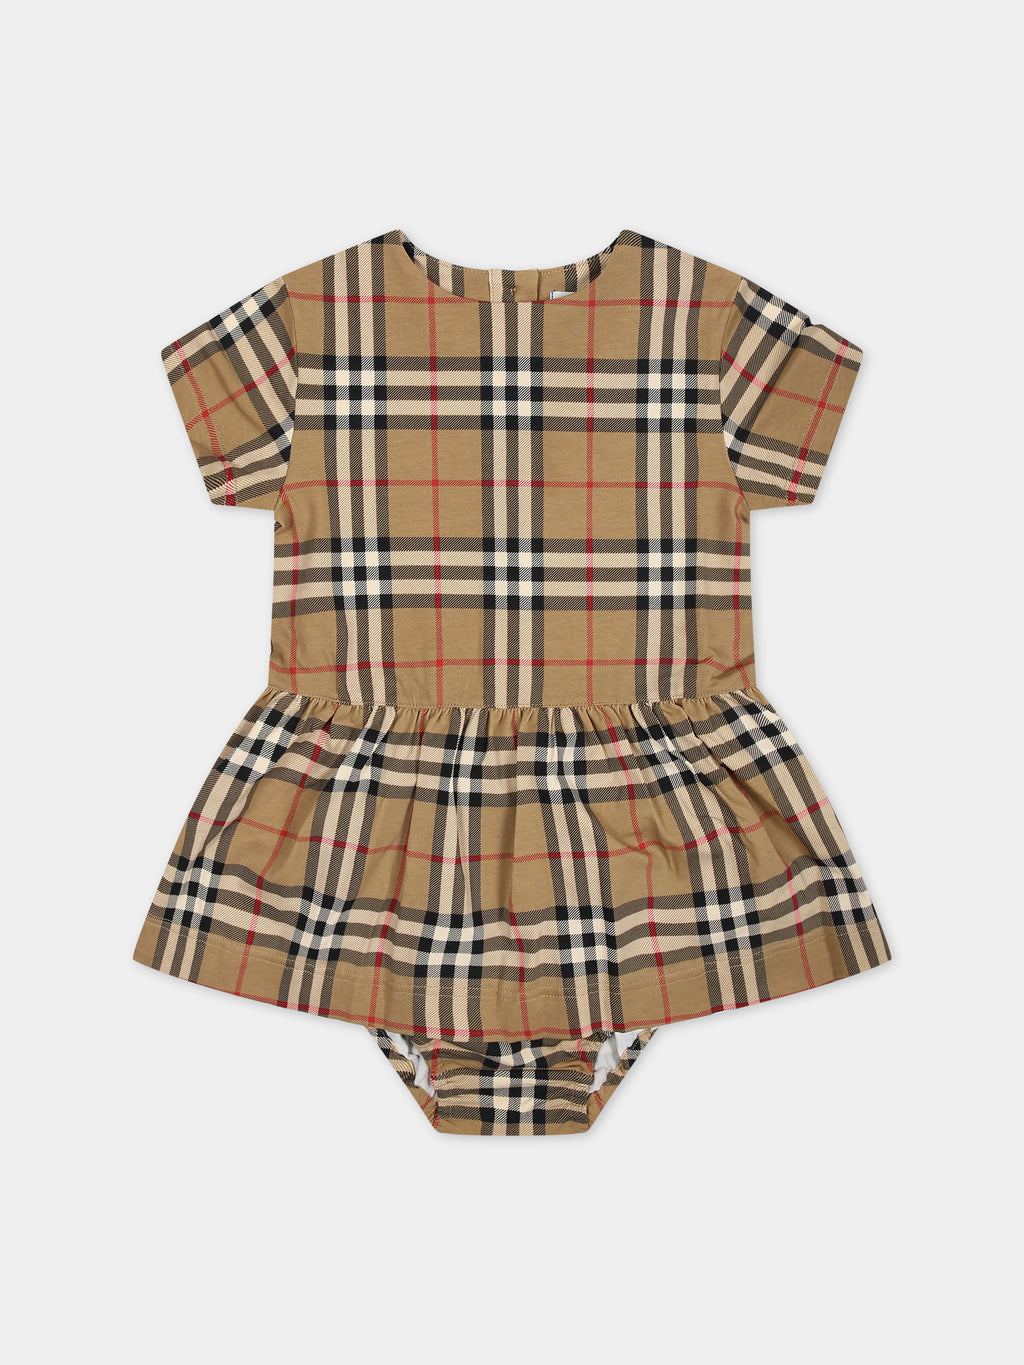 Beige dress for baby girl with iconic all-over vintage check